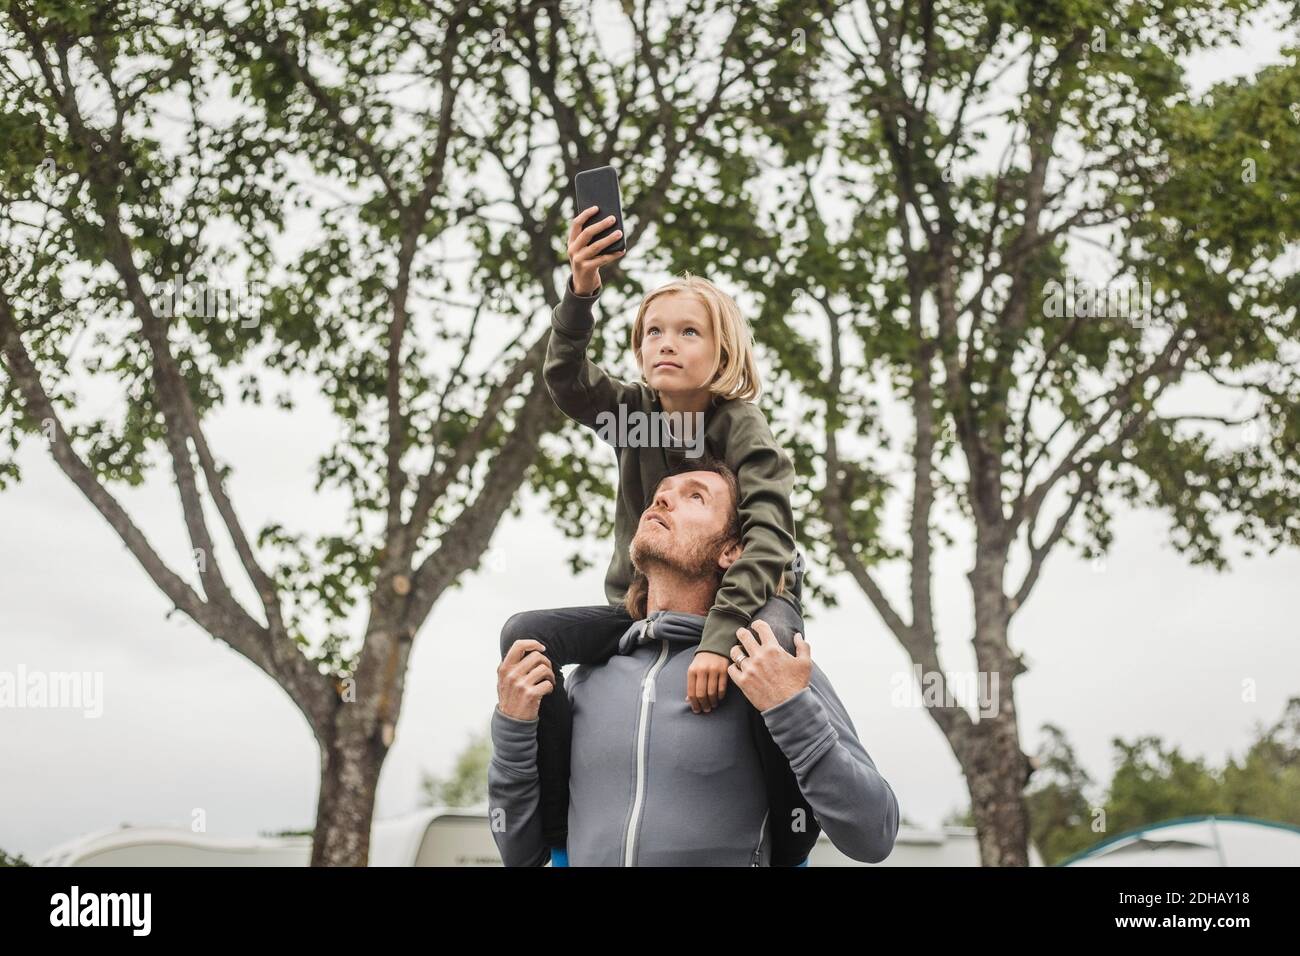 Girl holding mobile phone while sitting on father's shoulders against trees Stock Photo